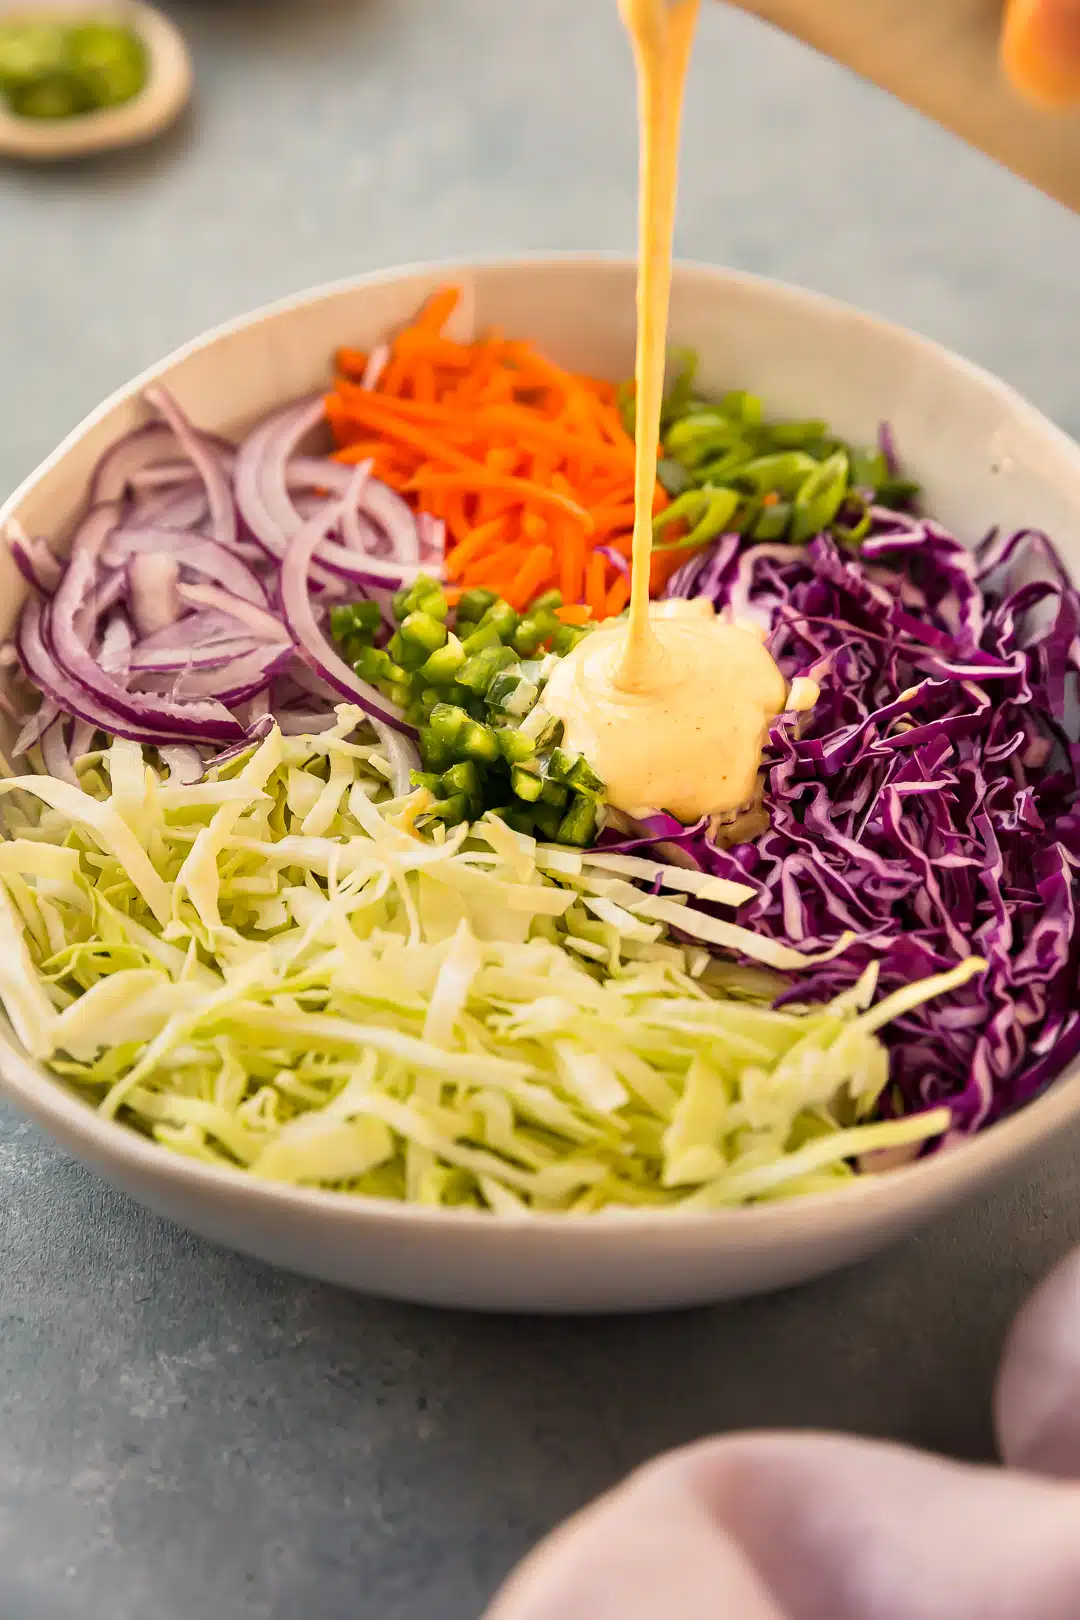 Angled, action photo of dressing being poured over cabbage jalapeno slaw in a large mixing bowl.